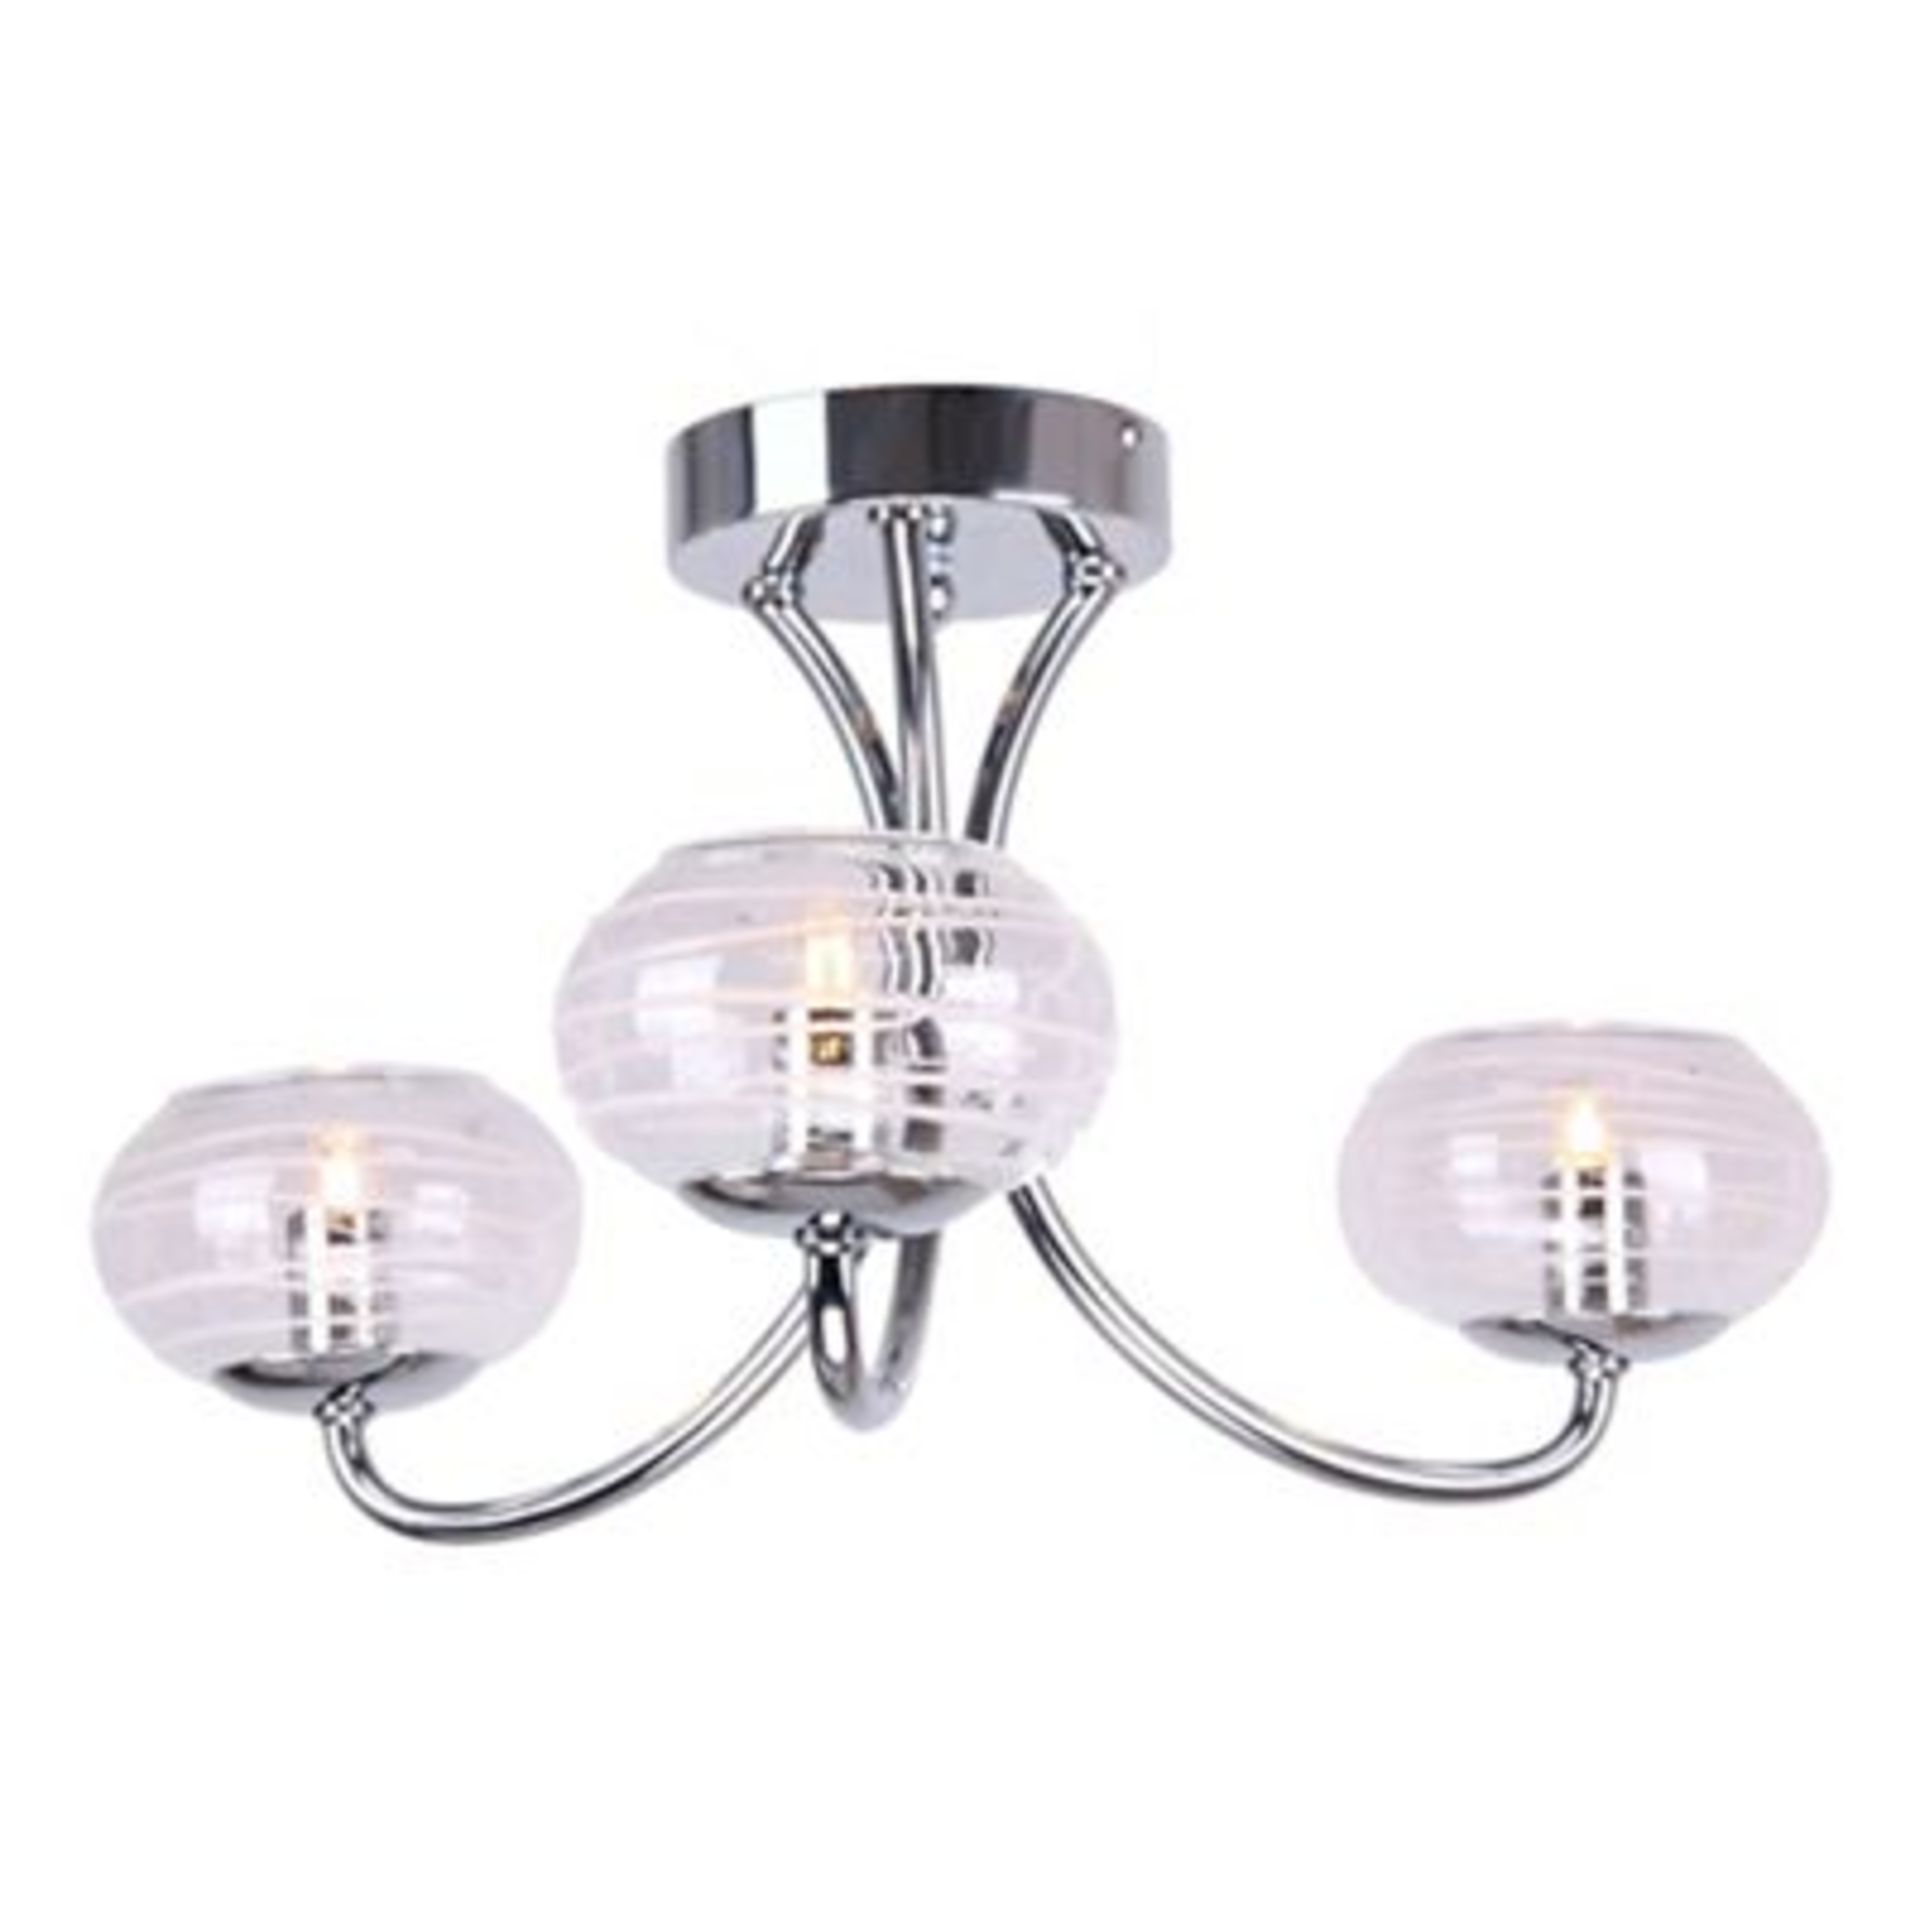 Boxed Home Collection Imogen 3 Light Flush Ceiling Light RRP £85 (Viewing Is Highly Recommended)